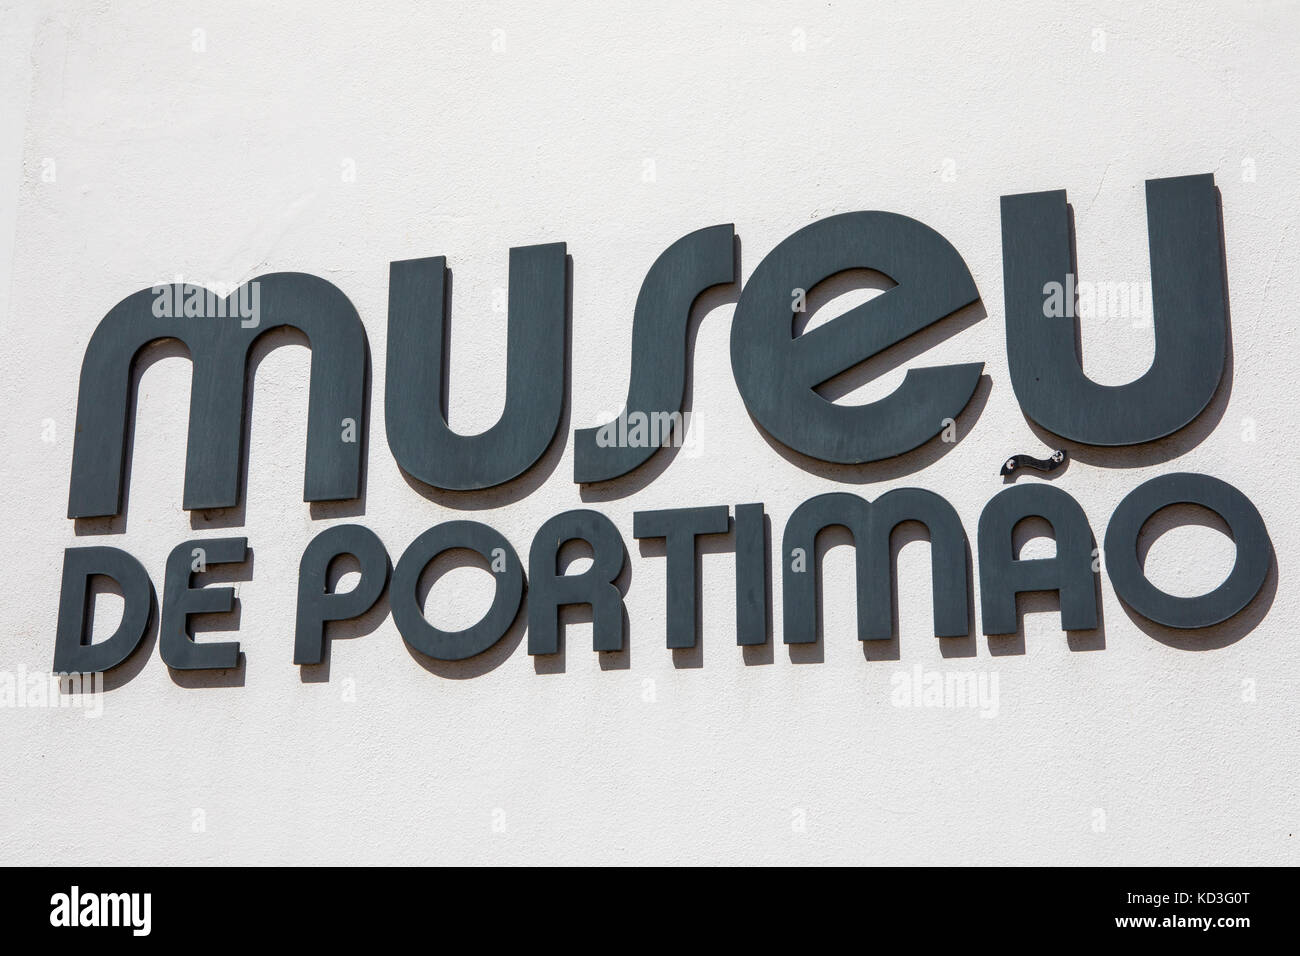 PORTIMAO, PORTUGAL - 14TH SEPTEMBER 2017: A sign at the Museu De Portimao in the historic town of Portimao in Portugal, on 14th September 2017. Stock Photo